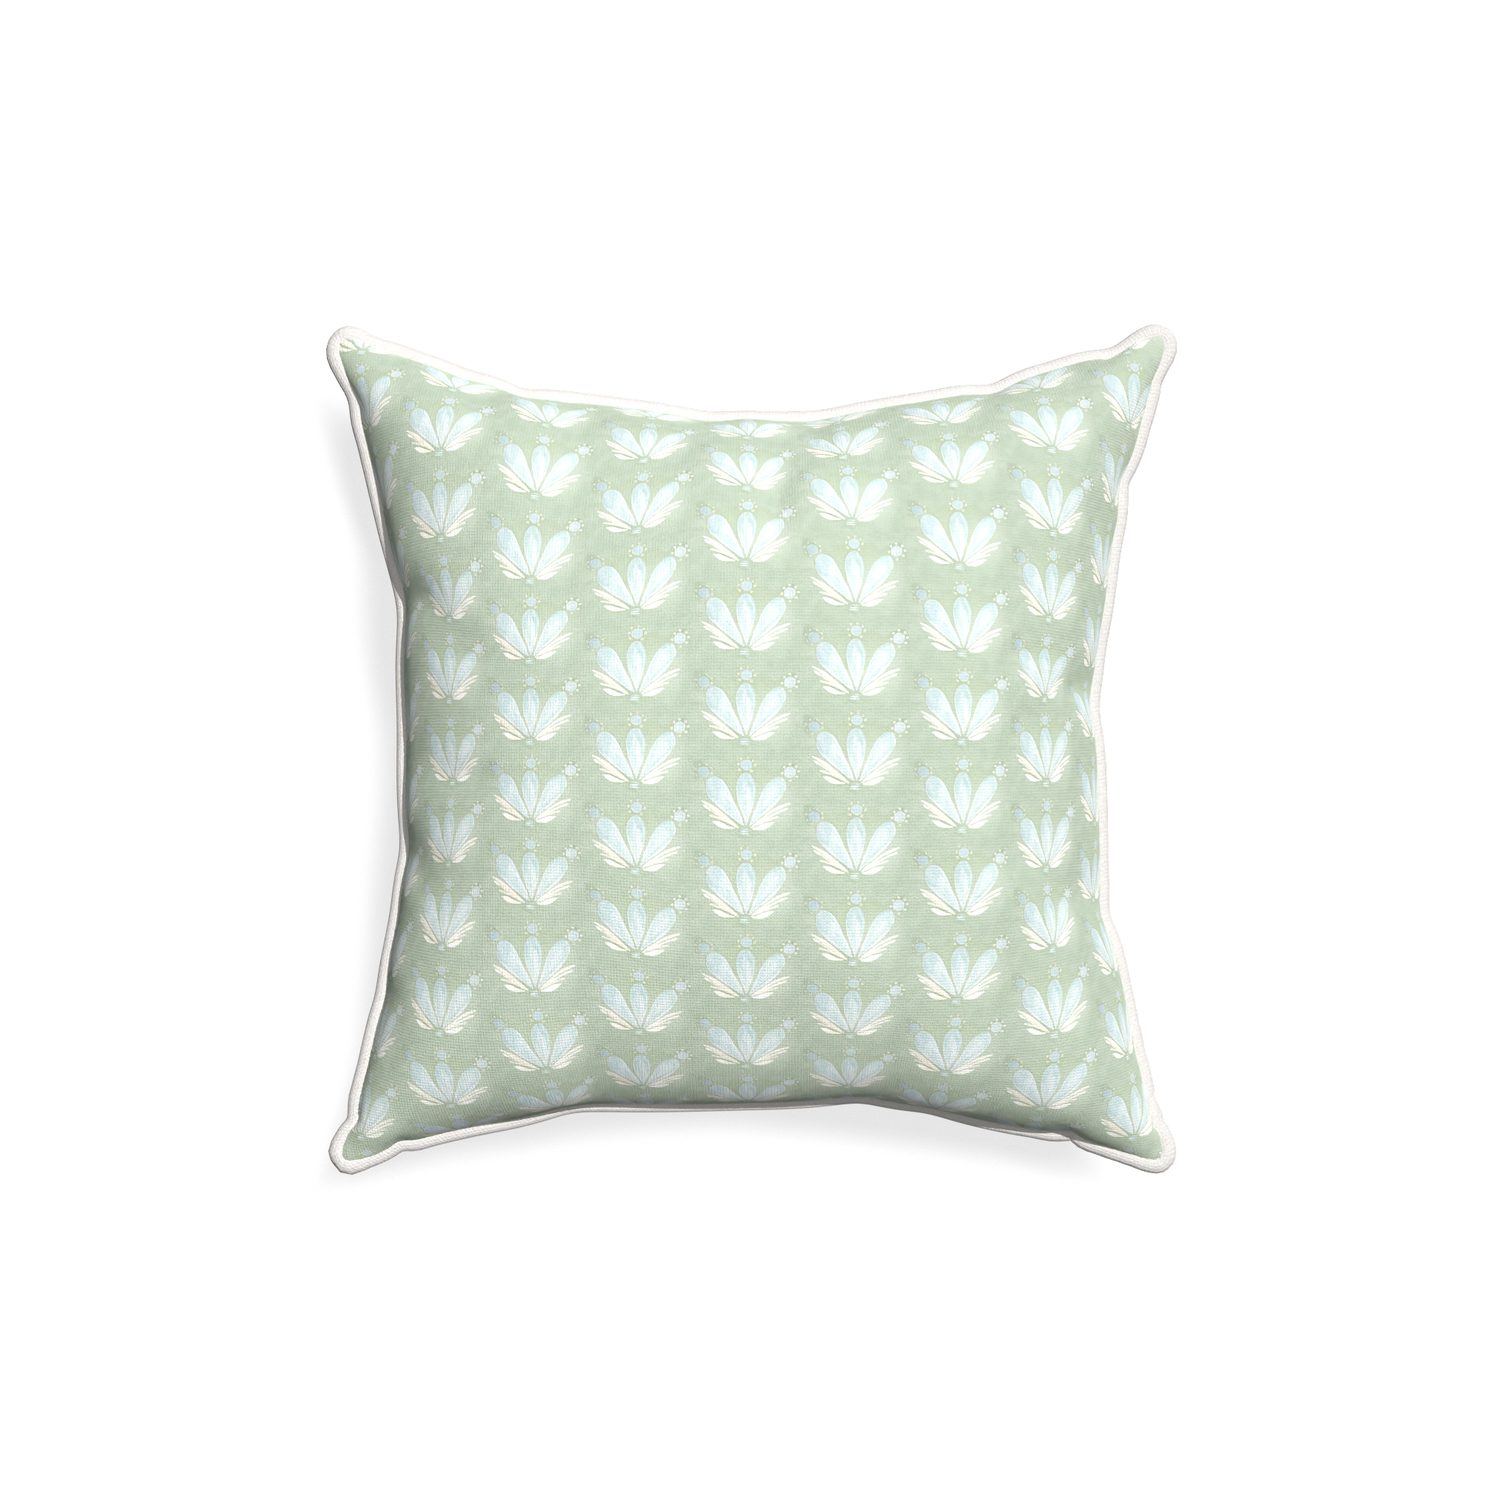 18-square serena sea salt custom blue & green floral drop repeatpillow with snow piping on white background